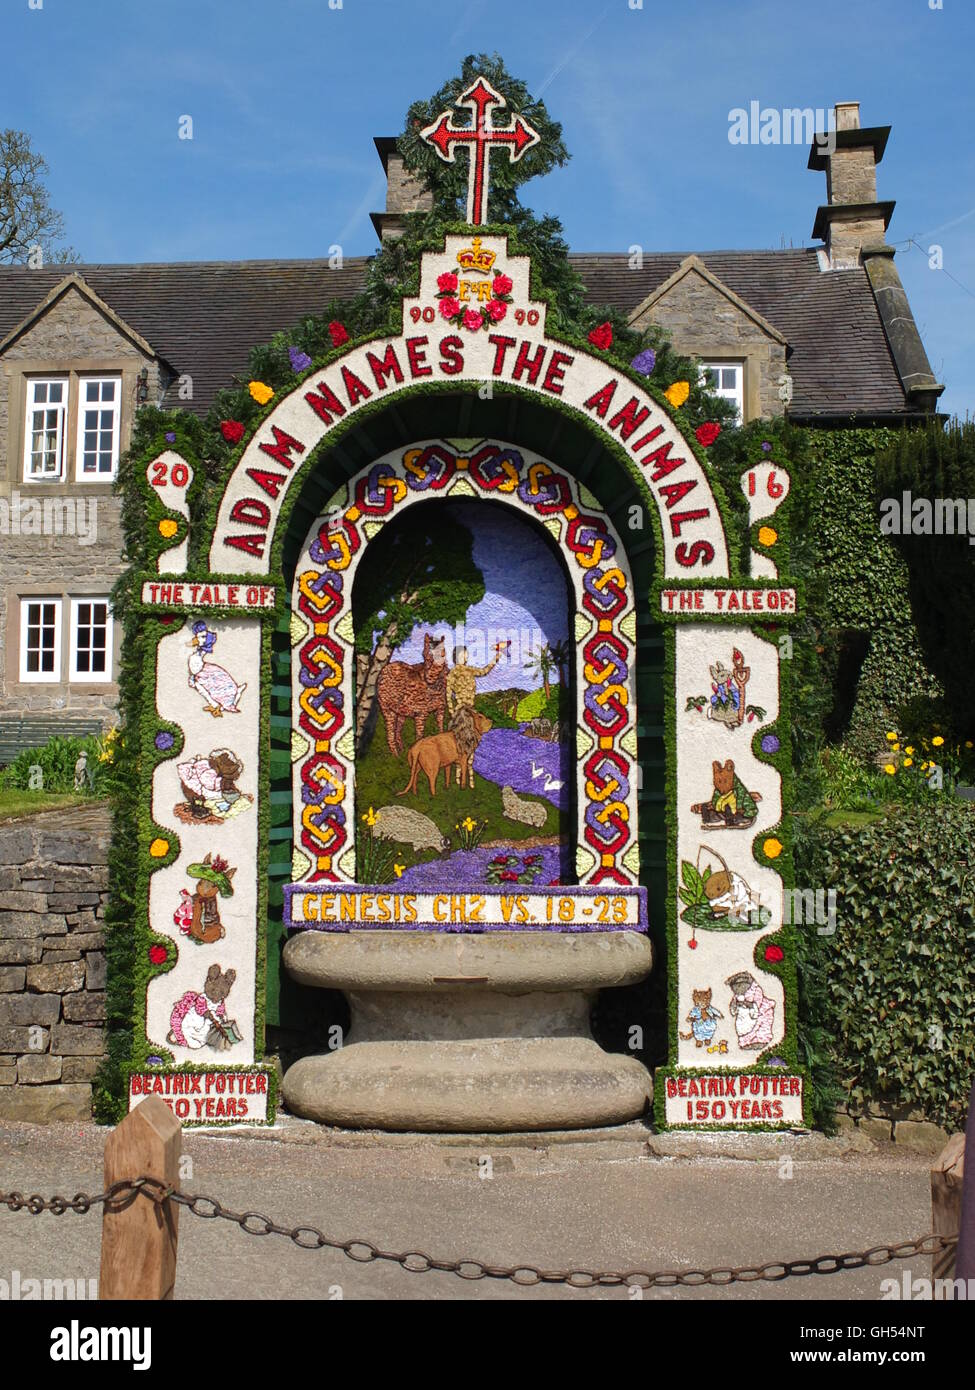 The 2016 well dressing depicting 'Adam Names The Animals' at Hands Well, Tissington, Derbyshire. Stock Photo